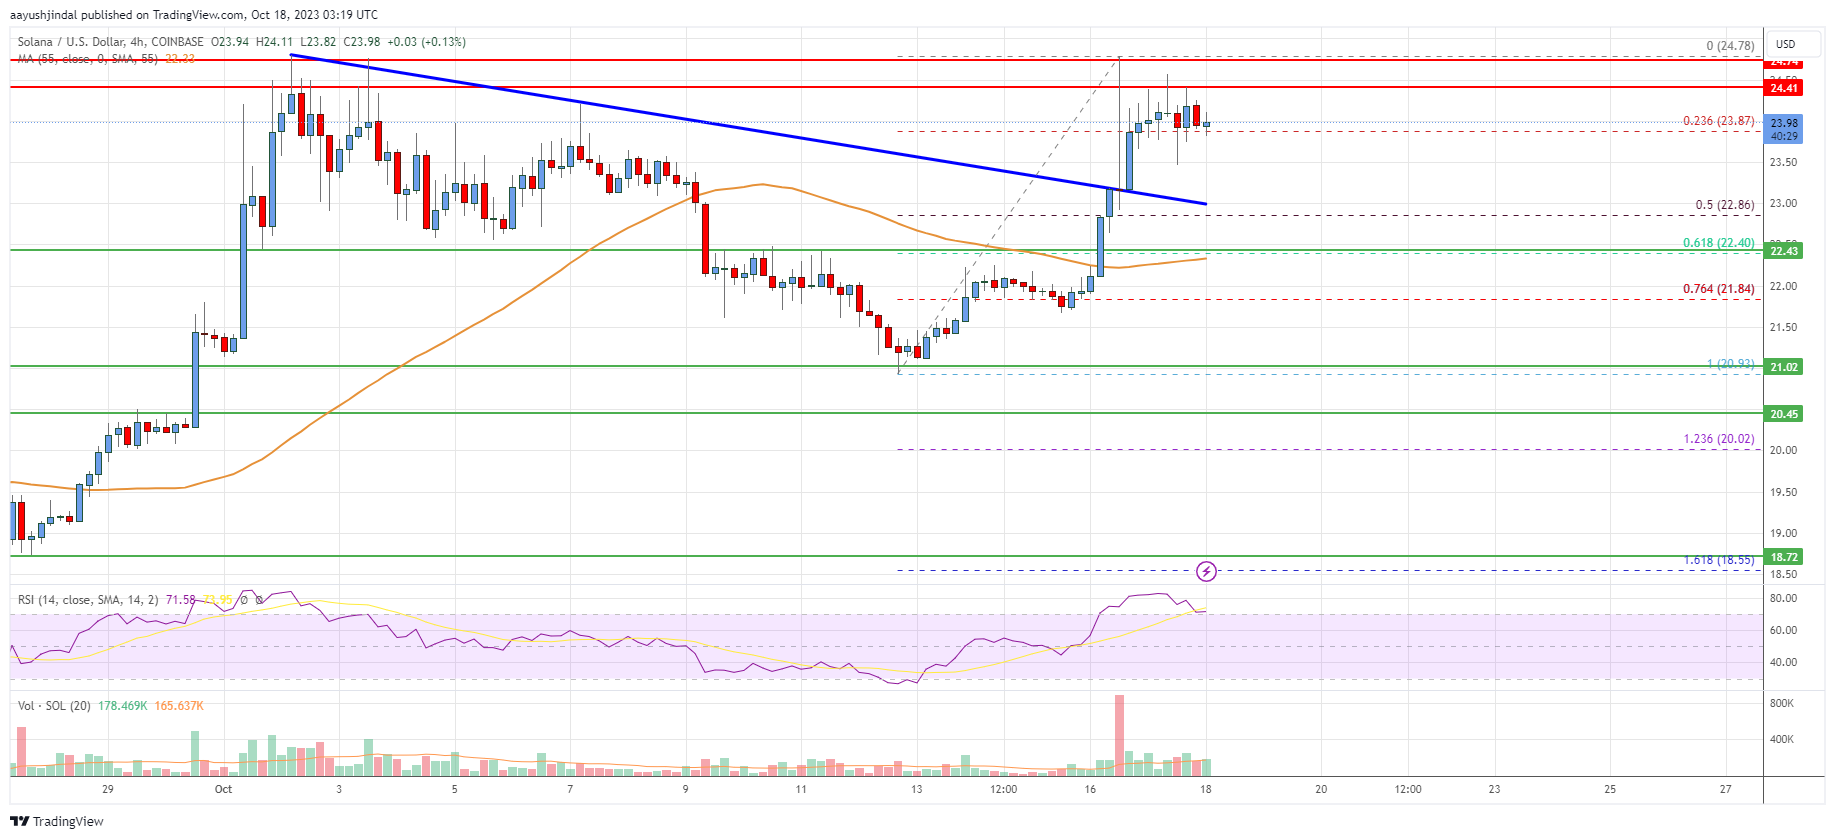 Solana (SOL) Price Analysis: More Gains Possible Above $25